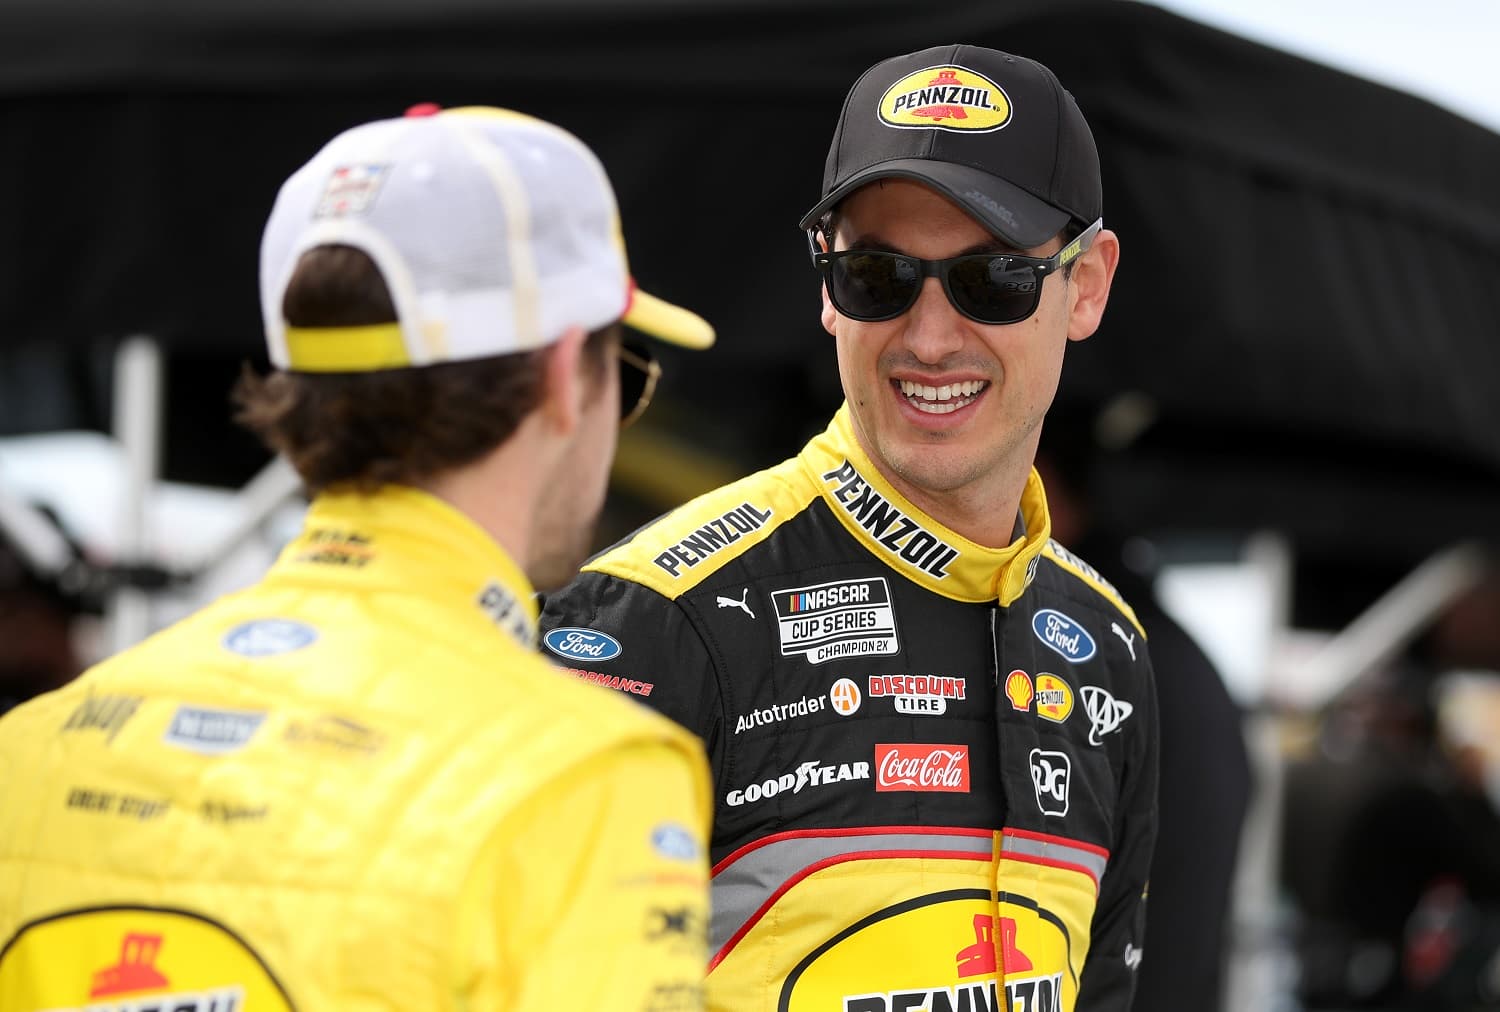 Joey Logano talks to Ryan Blaney on the grid during practice for the NASCAR Cup Series Pennzoil 400 at Las Vegas Motor Speedway on March 4, 2023. | Meg Oliphant/Getty Images